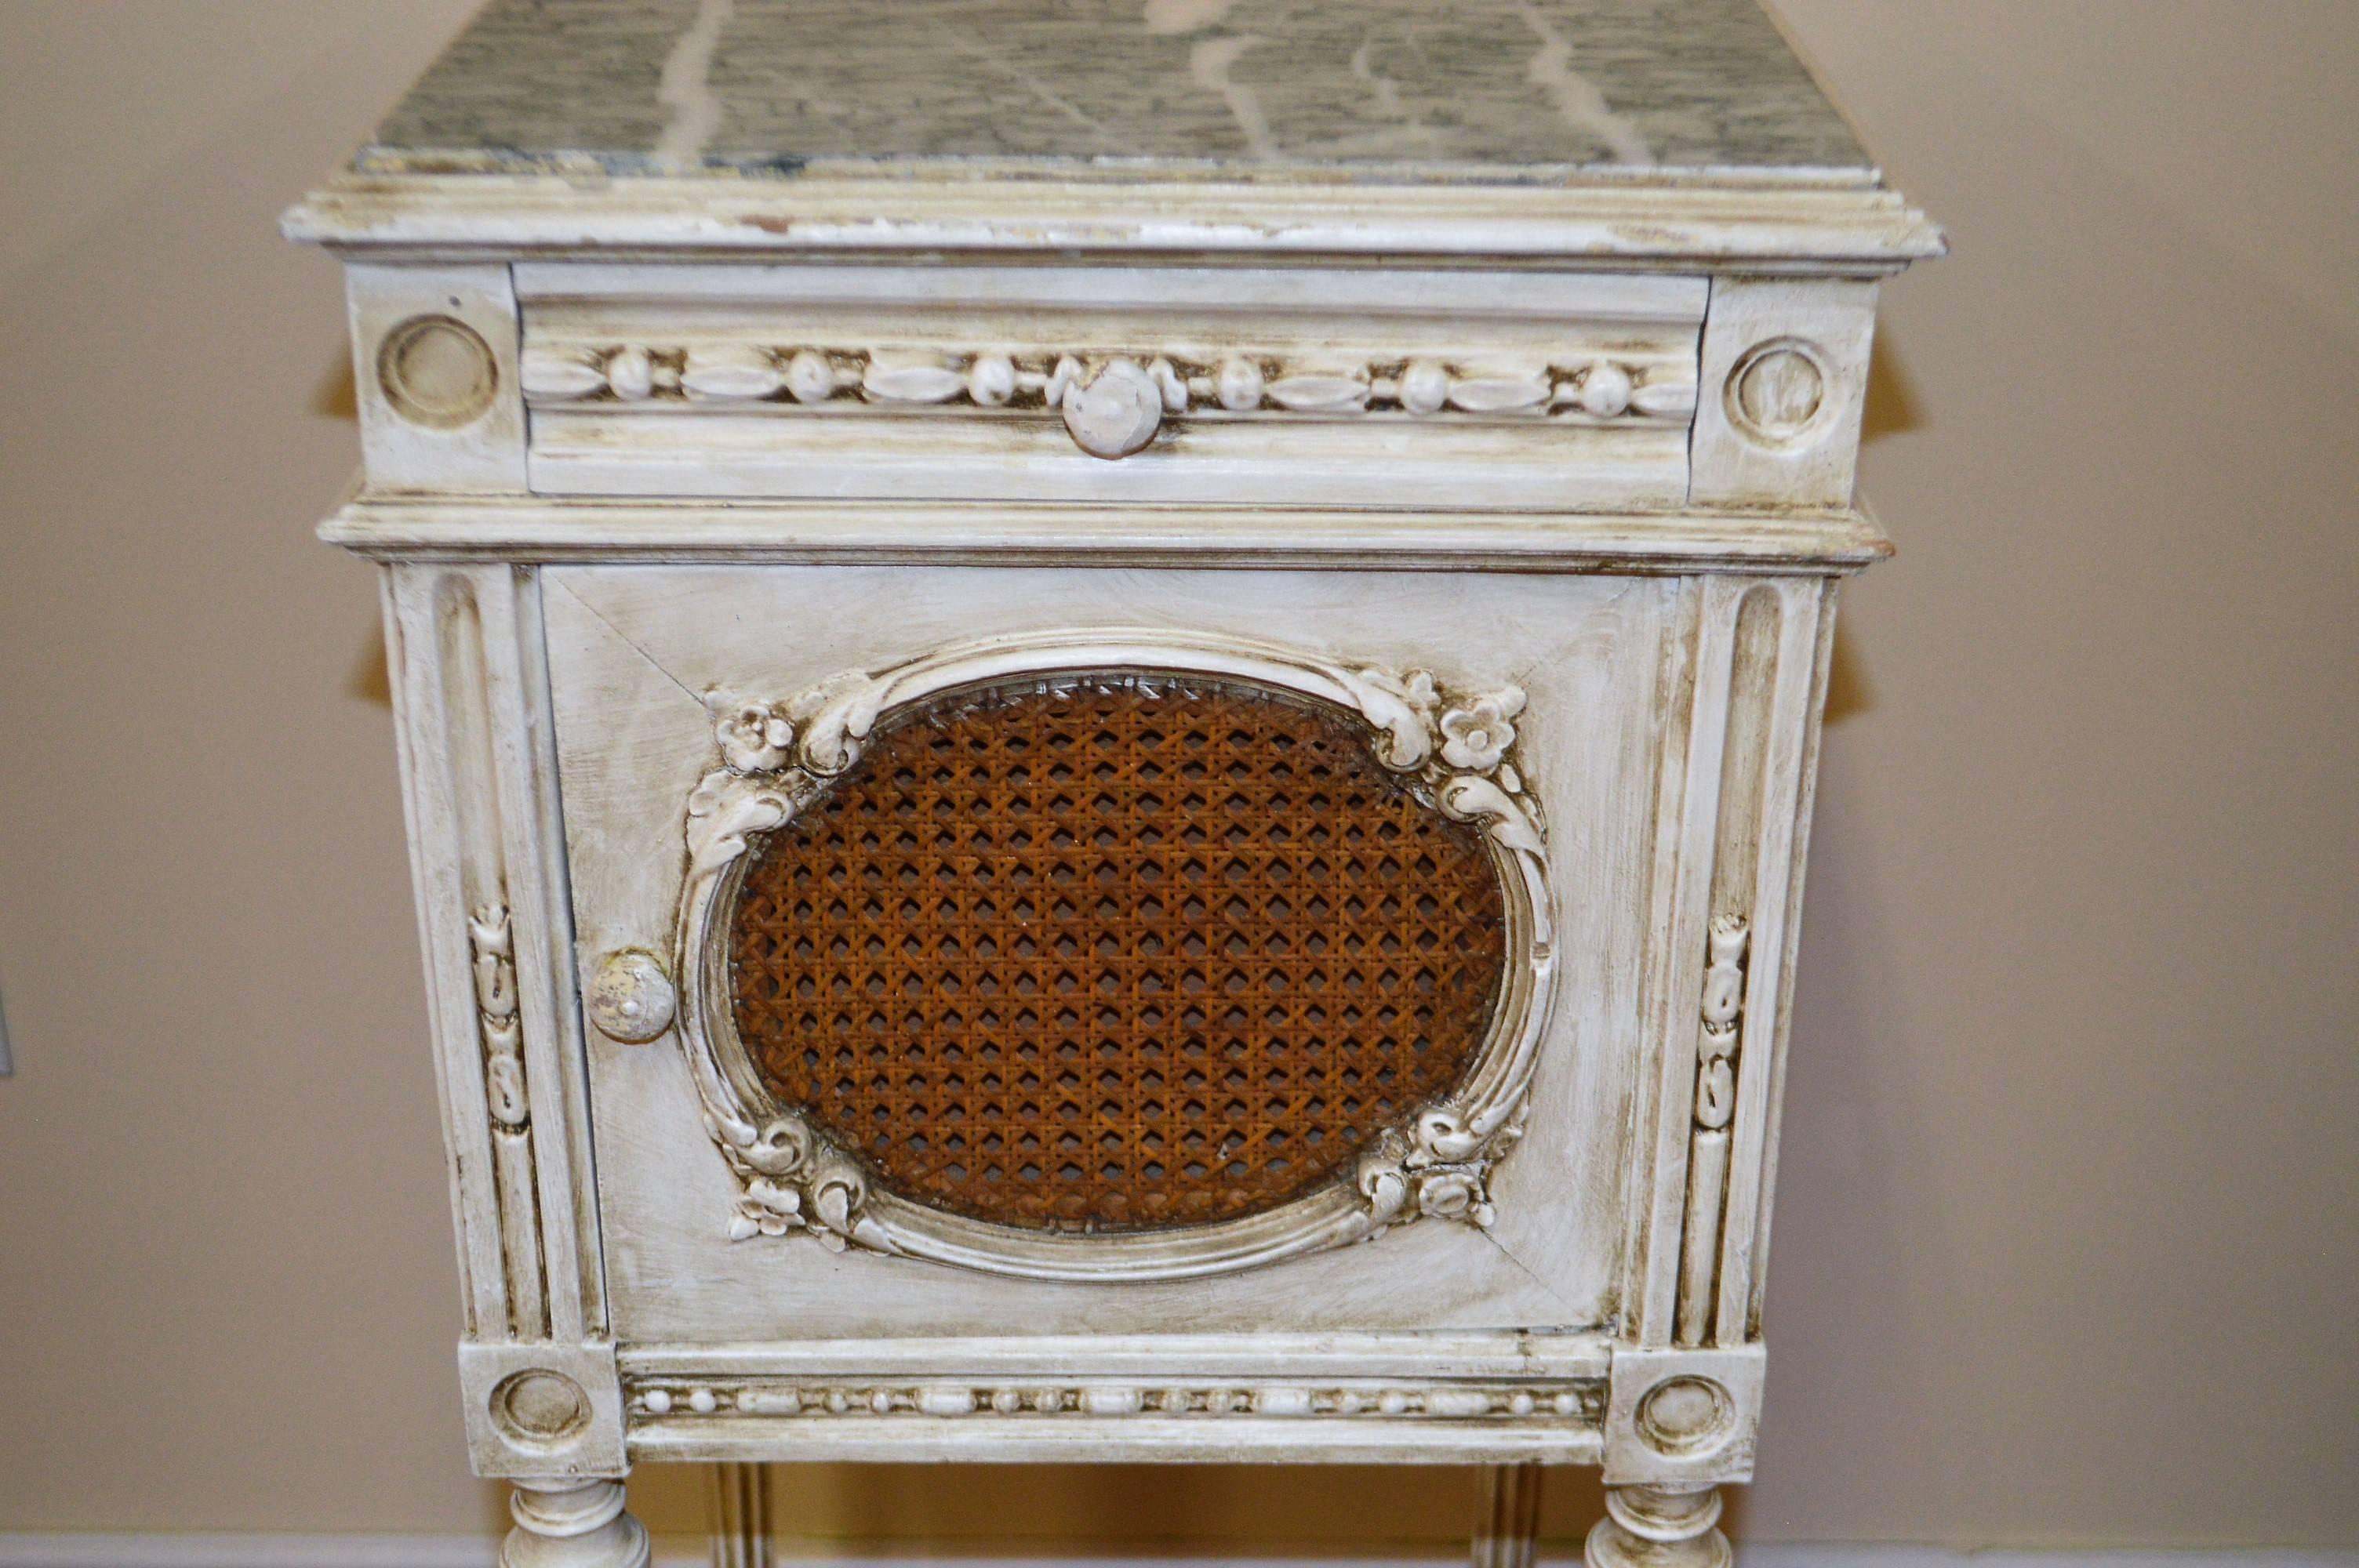 Very charming Louis XVI style painted nightstand or side table with a green and white marble top and caned medallion on front door.
It has a smaller drawer, a compartment for storage and a lower shelf.